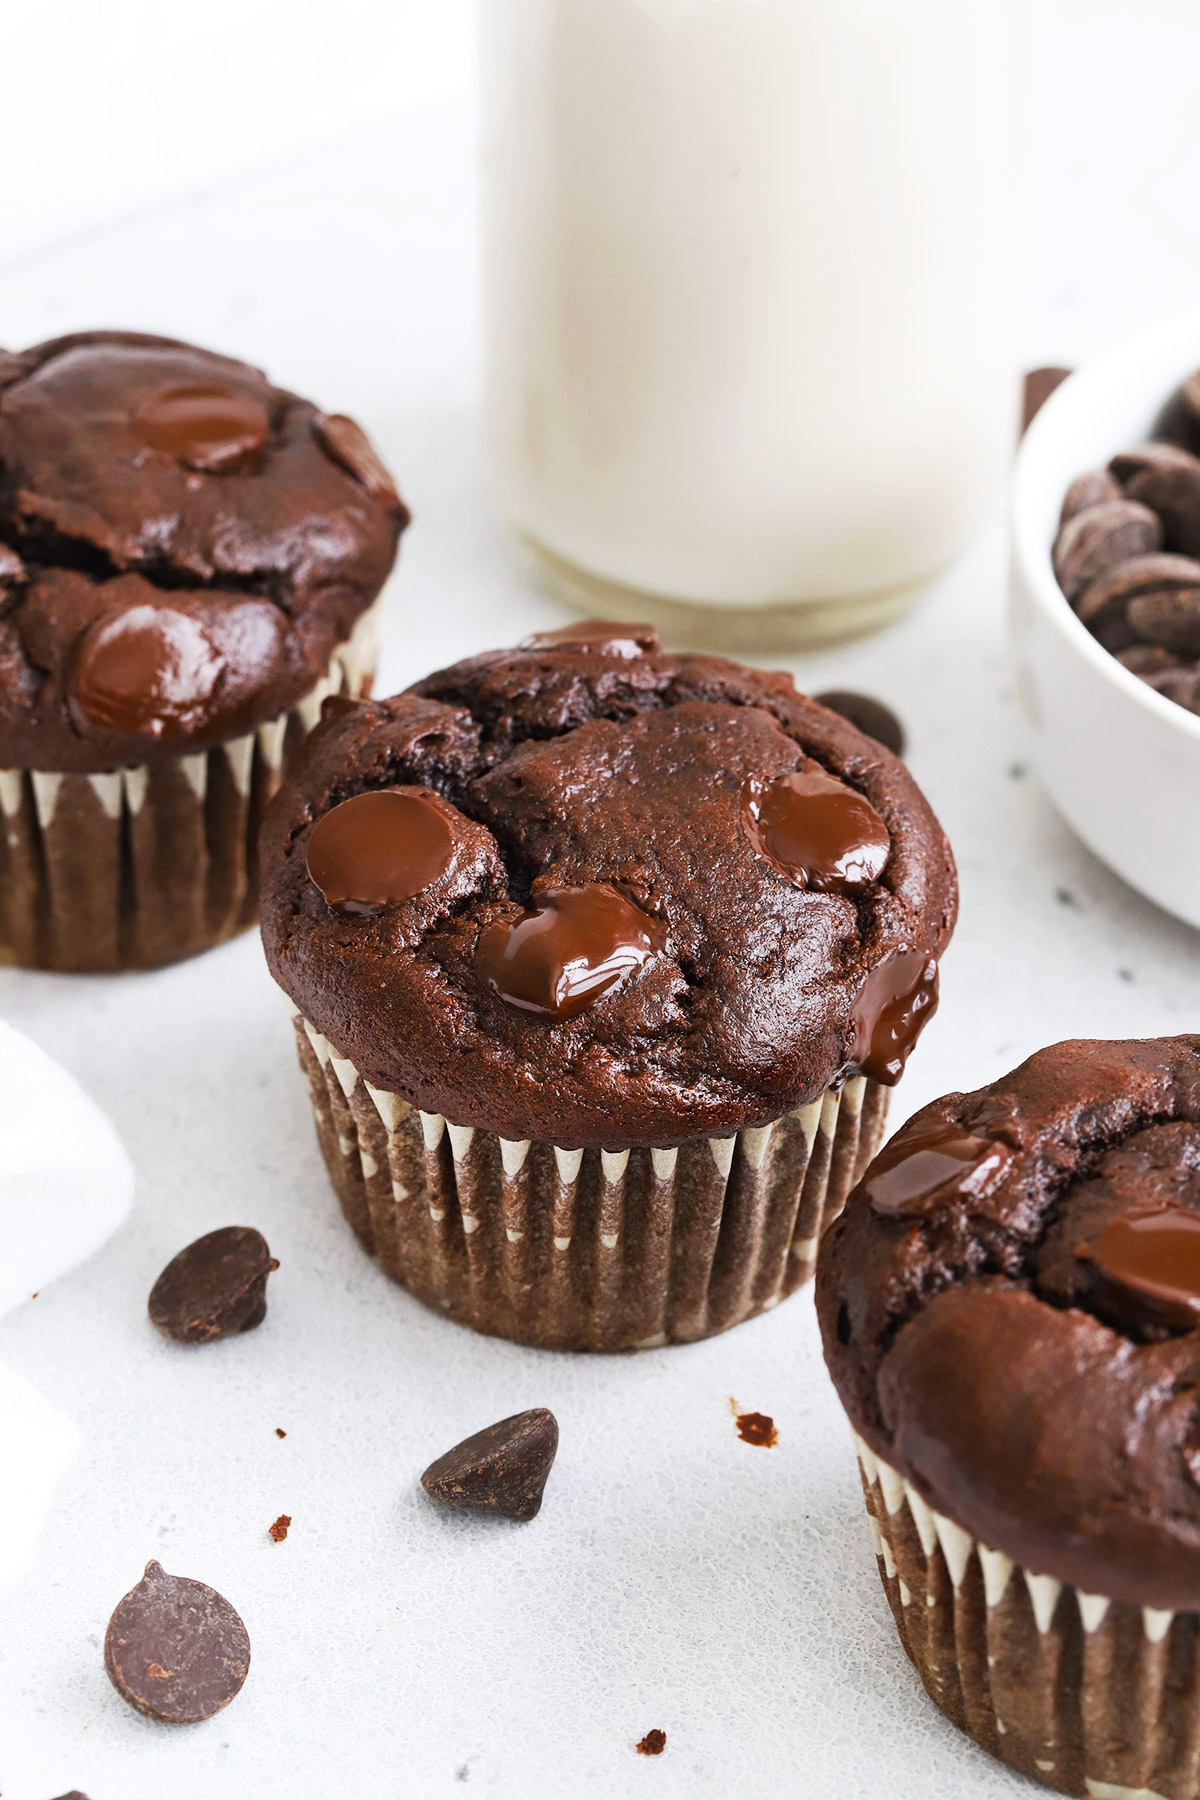 Three gluten-free chocolate banana muffins with a bowl of chocolate chips and a bottle of almond milk in the background